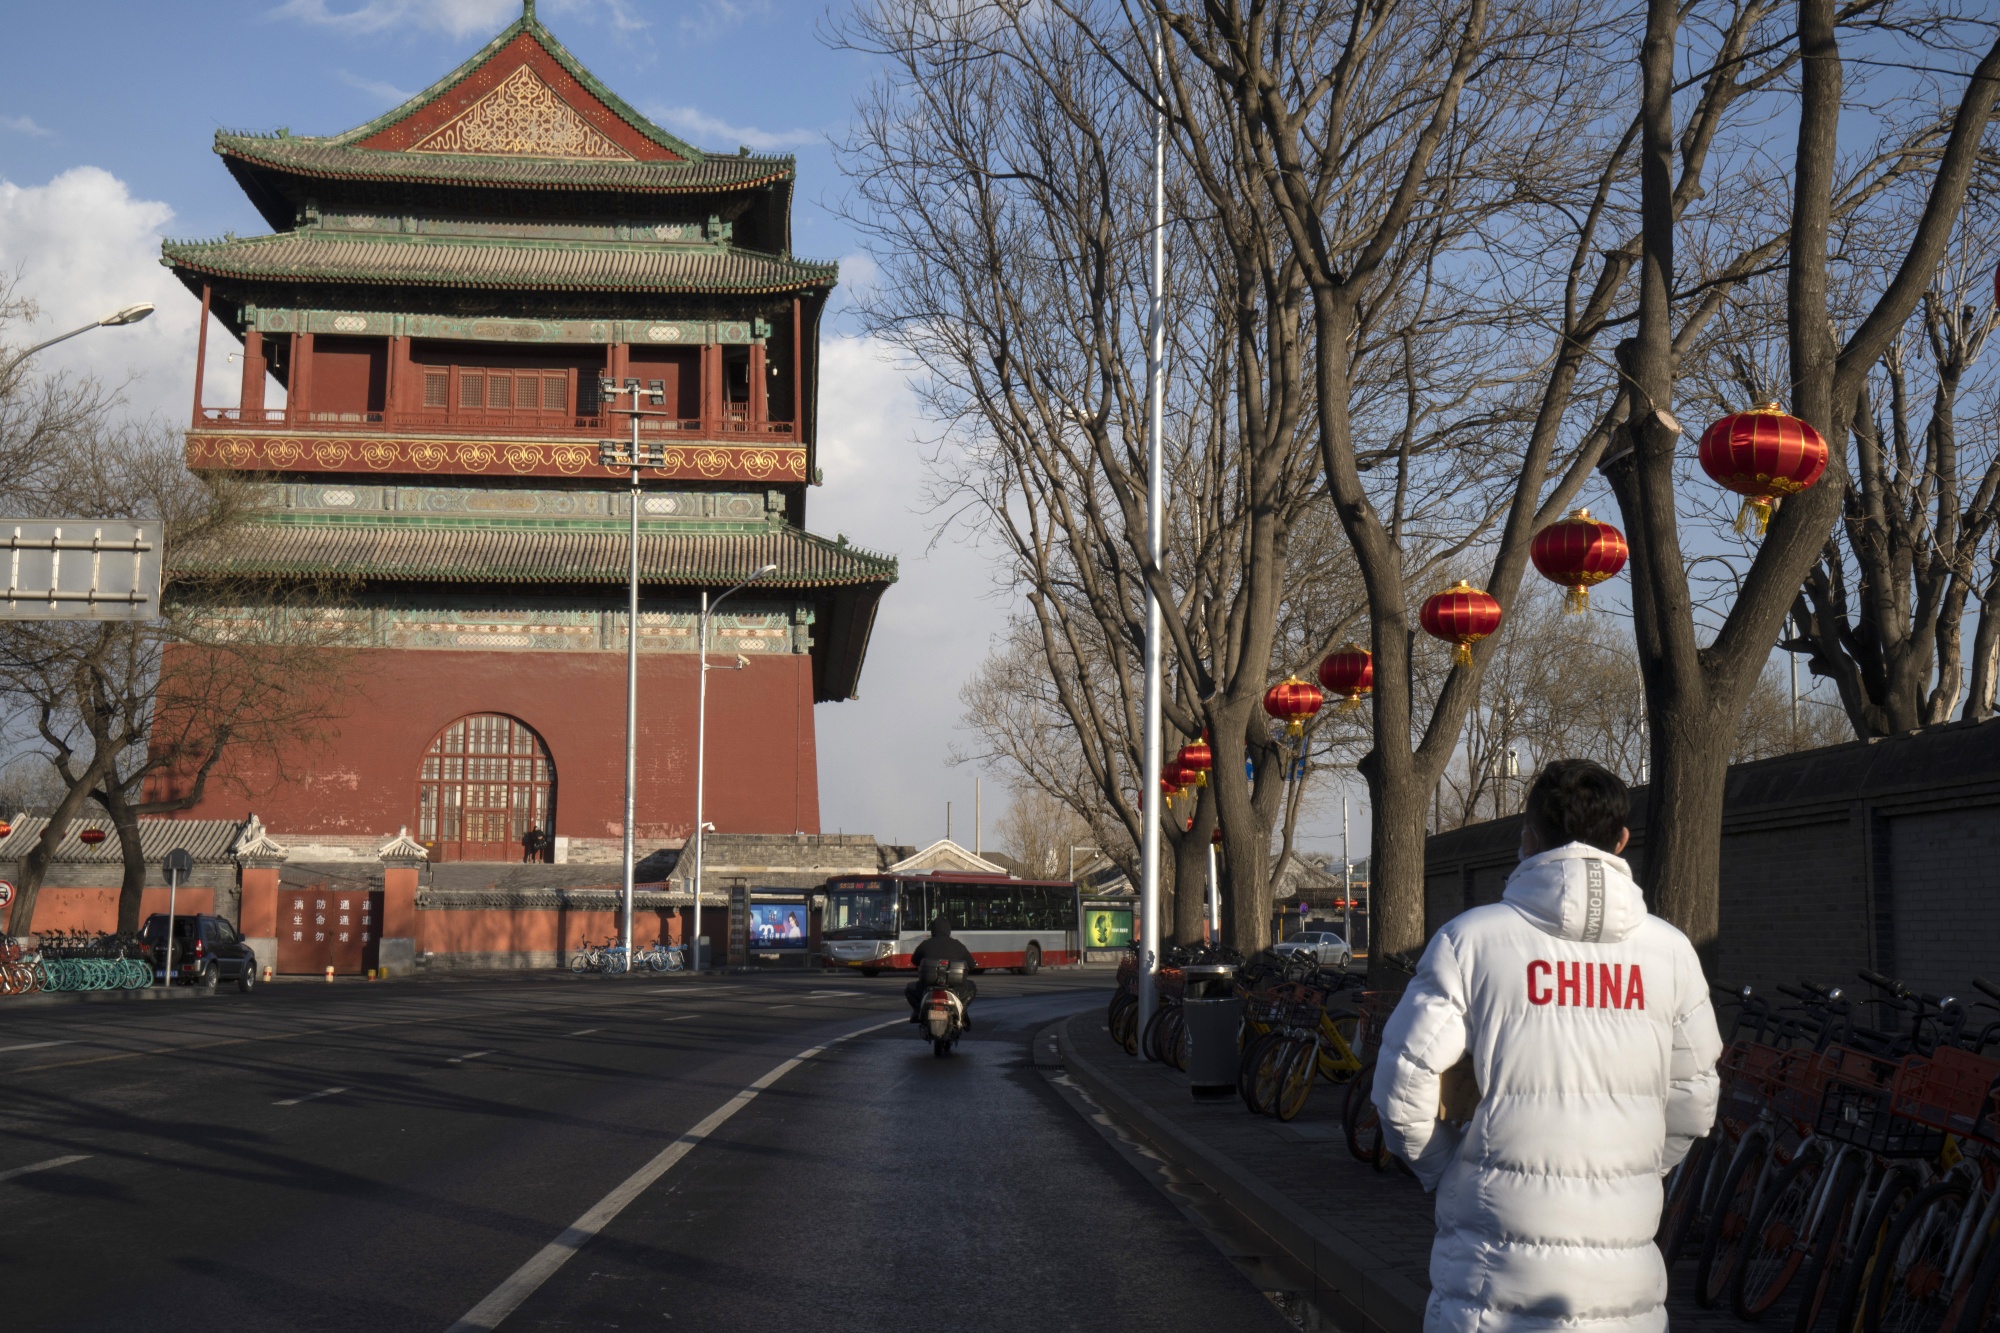 A pedestrian walks along a road past the Drum Tower in Beijing.